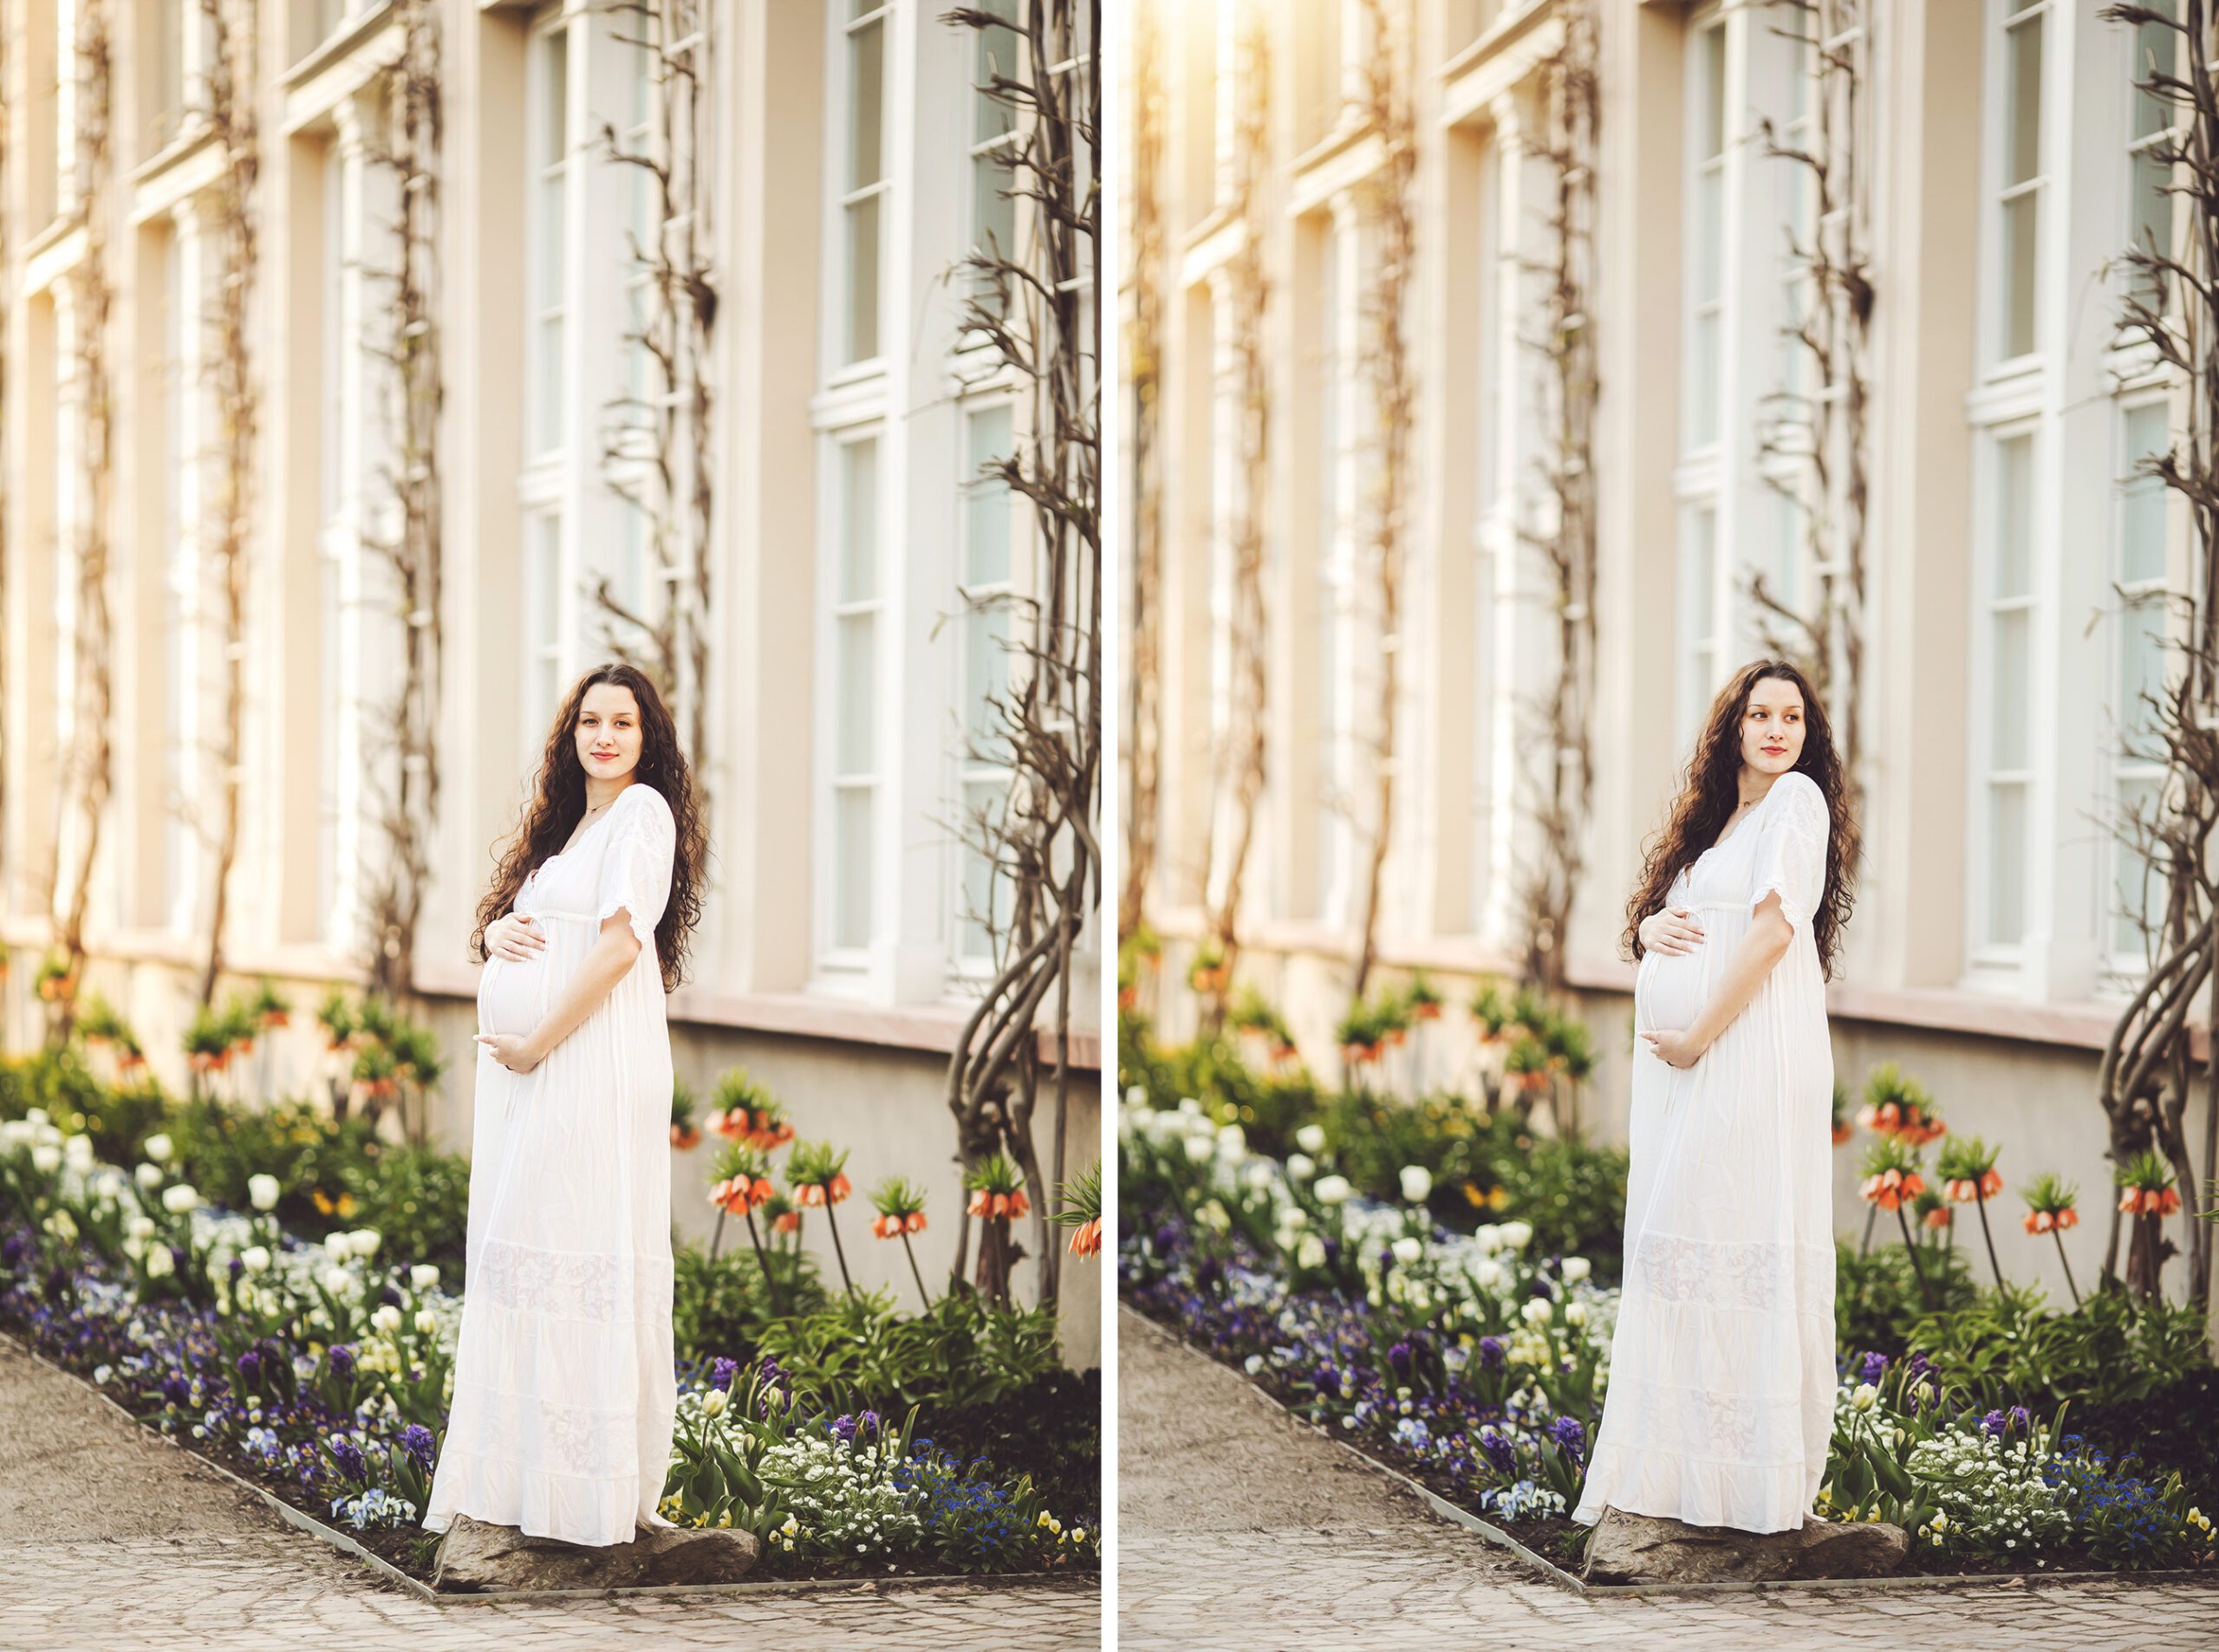 Kallyn by the Bad Homburg orangerie during her maternity session with Belle Vie Photography